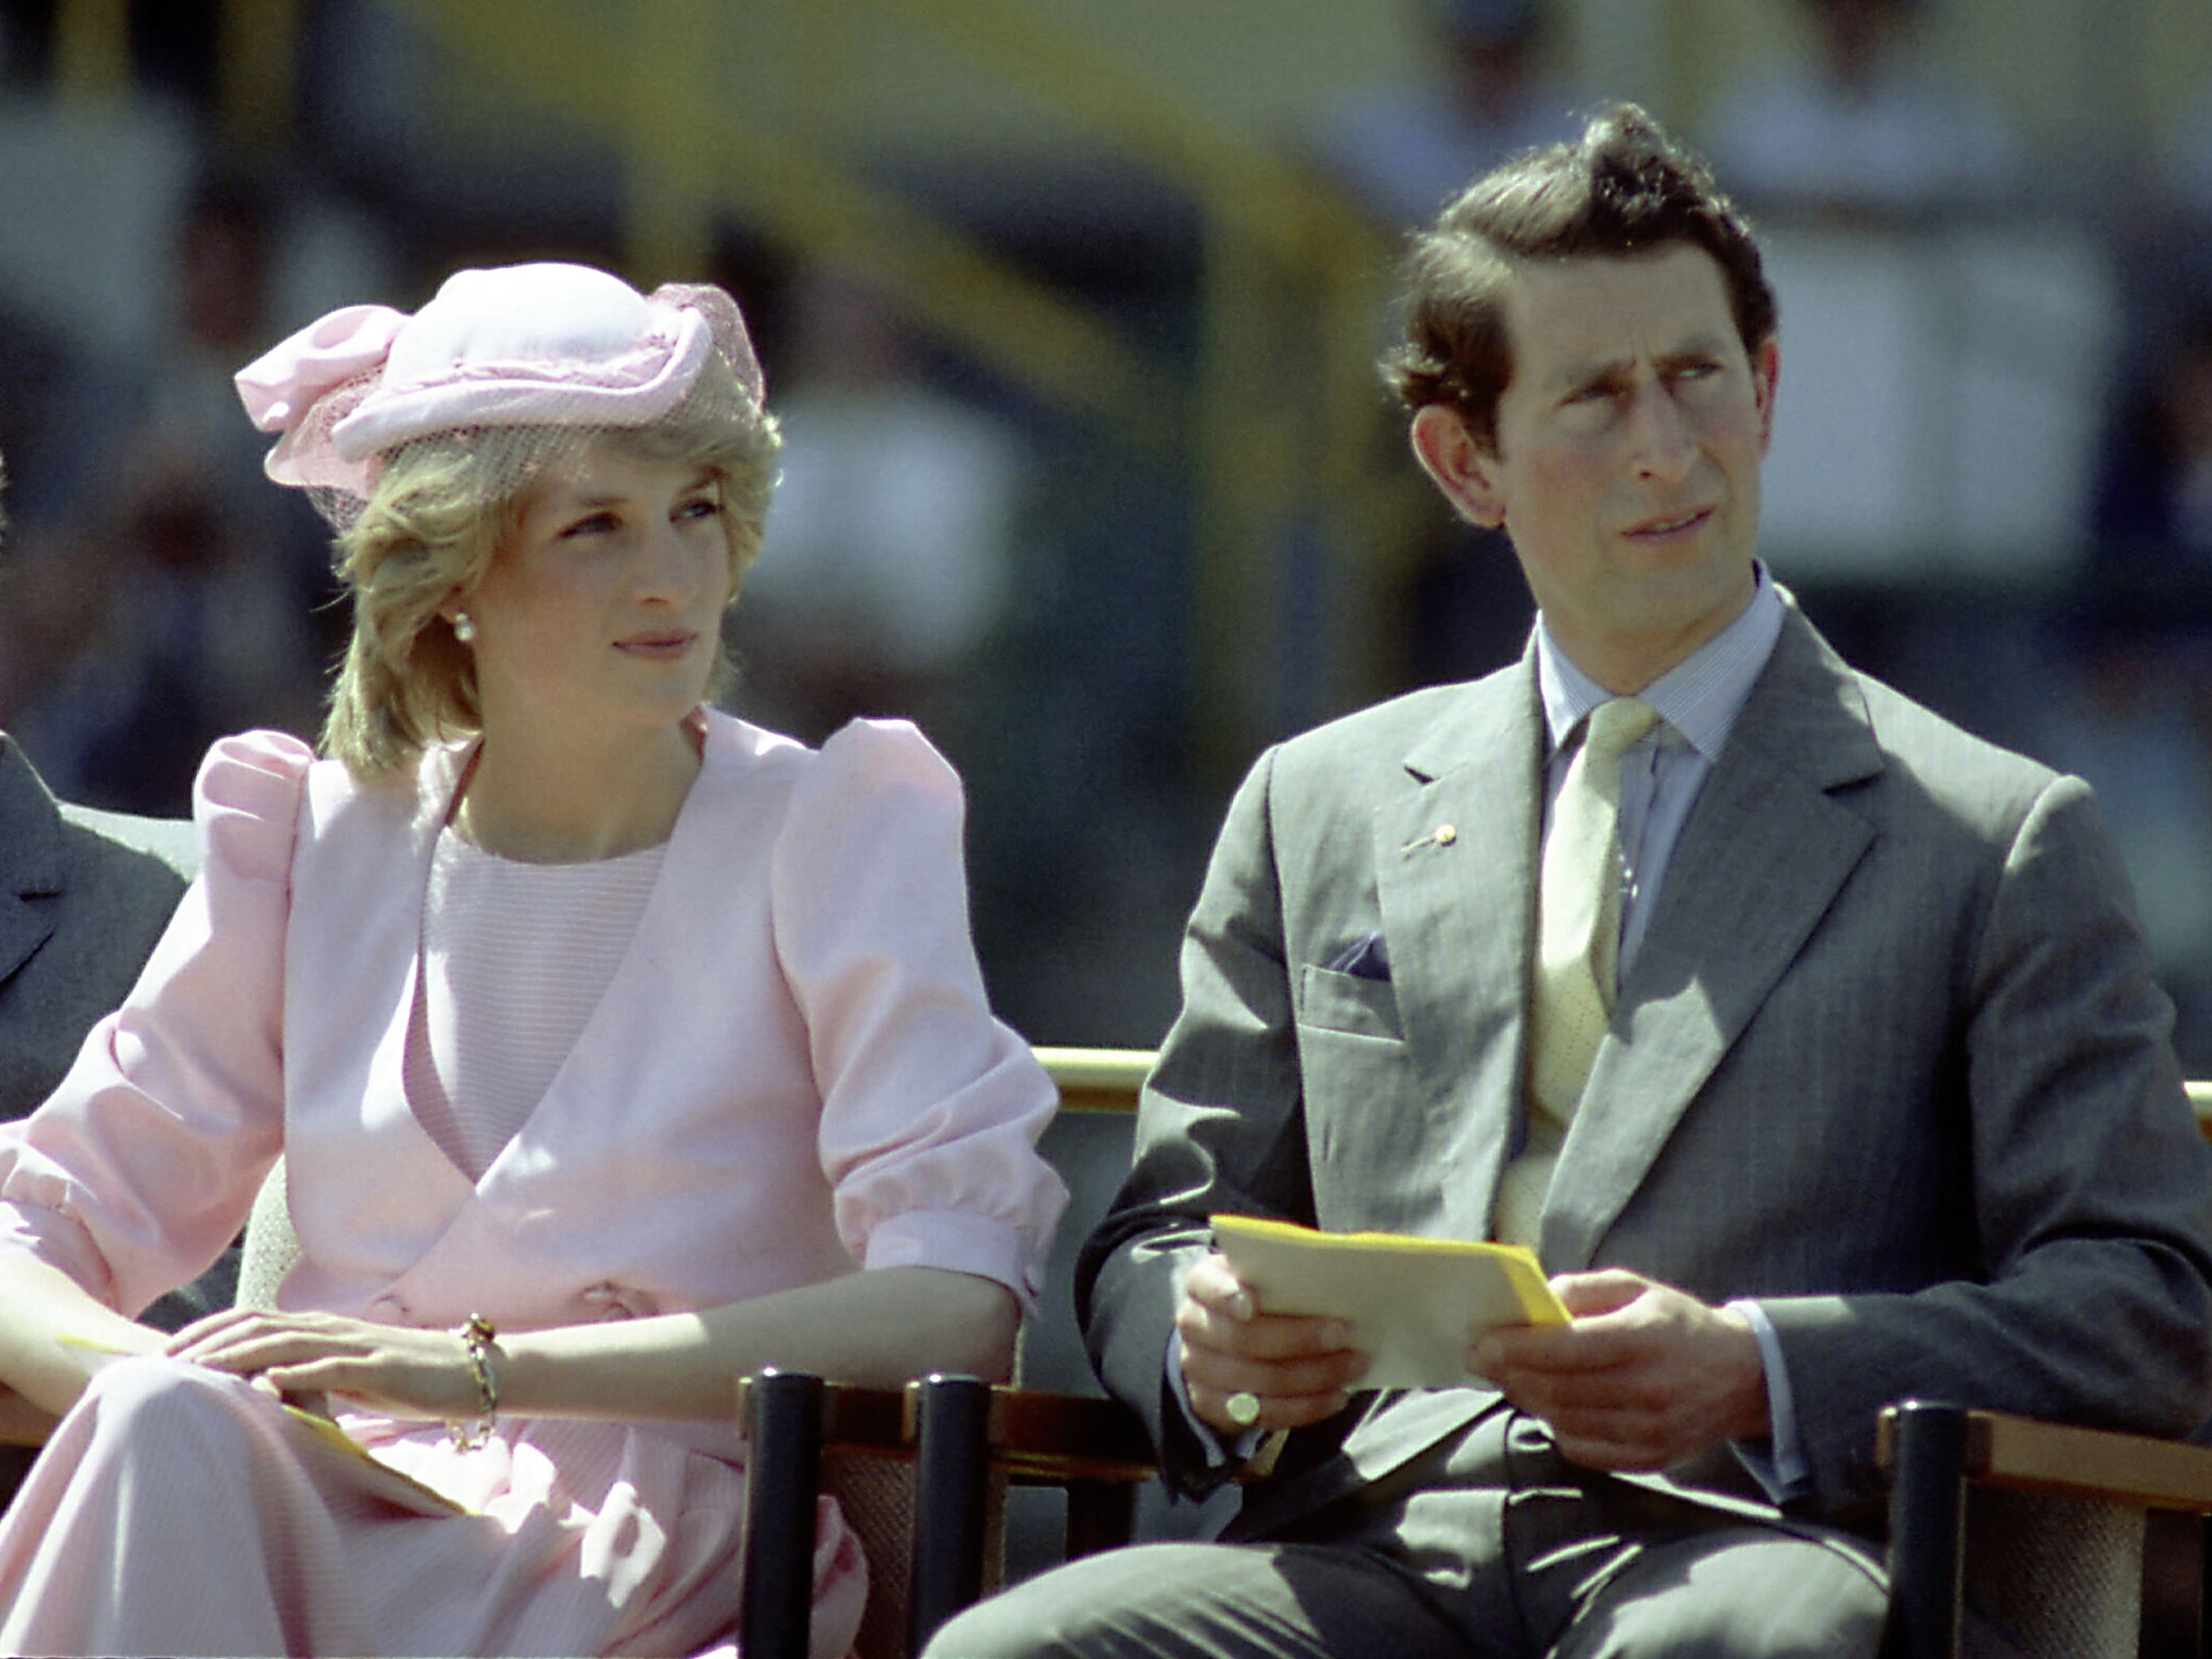 Princess Diana and Prince Charles watch an official event during their first royal Australian tour 1983